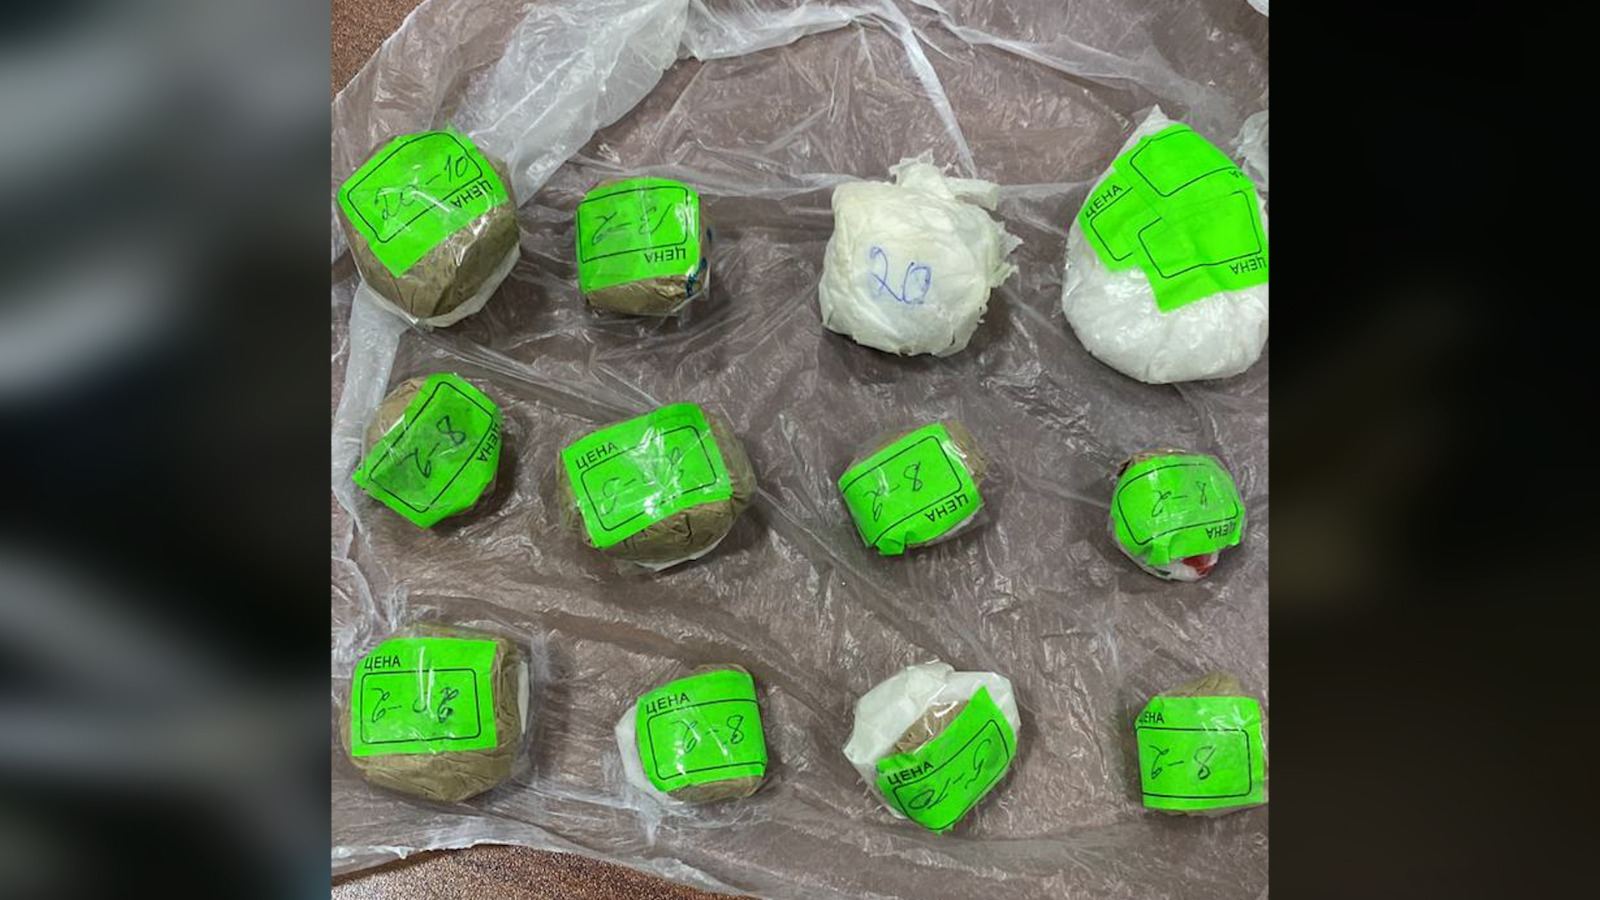 Azerbaijani police exposes local drug-trafficking scheme orchestrated by Iranian citizen (PHOTO/VIDEO)